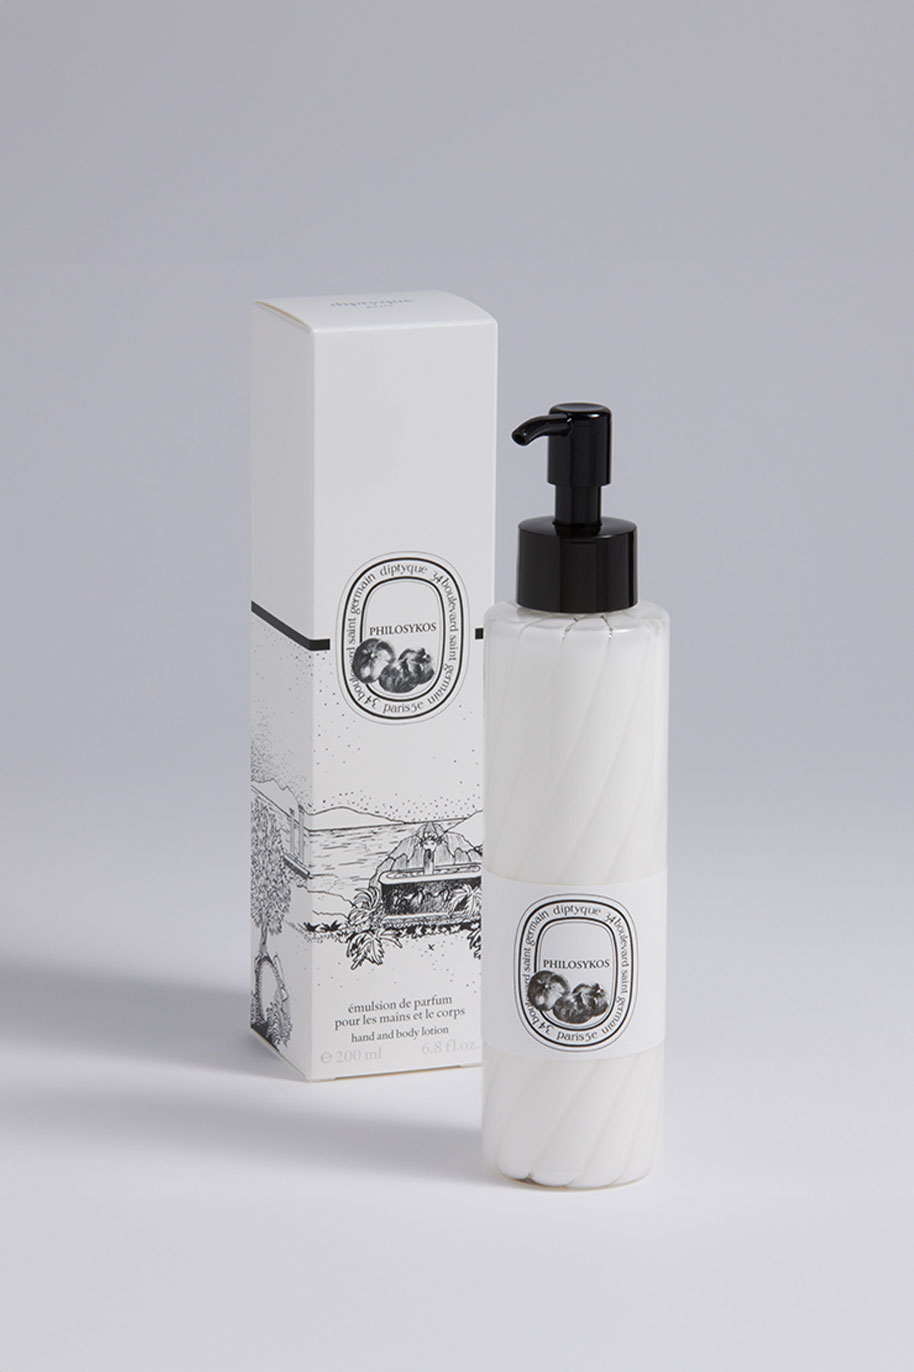 Diptyque for The Ritz-Carlton Philosykos Hand and Body Lotion